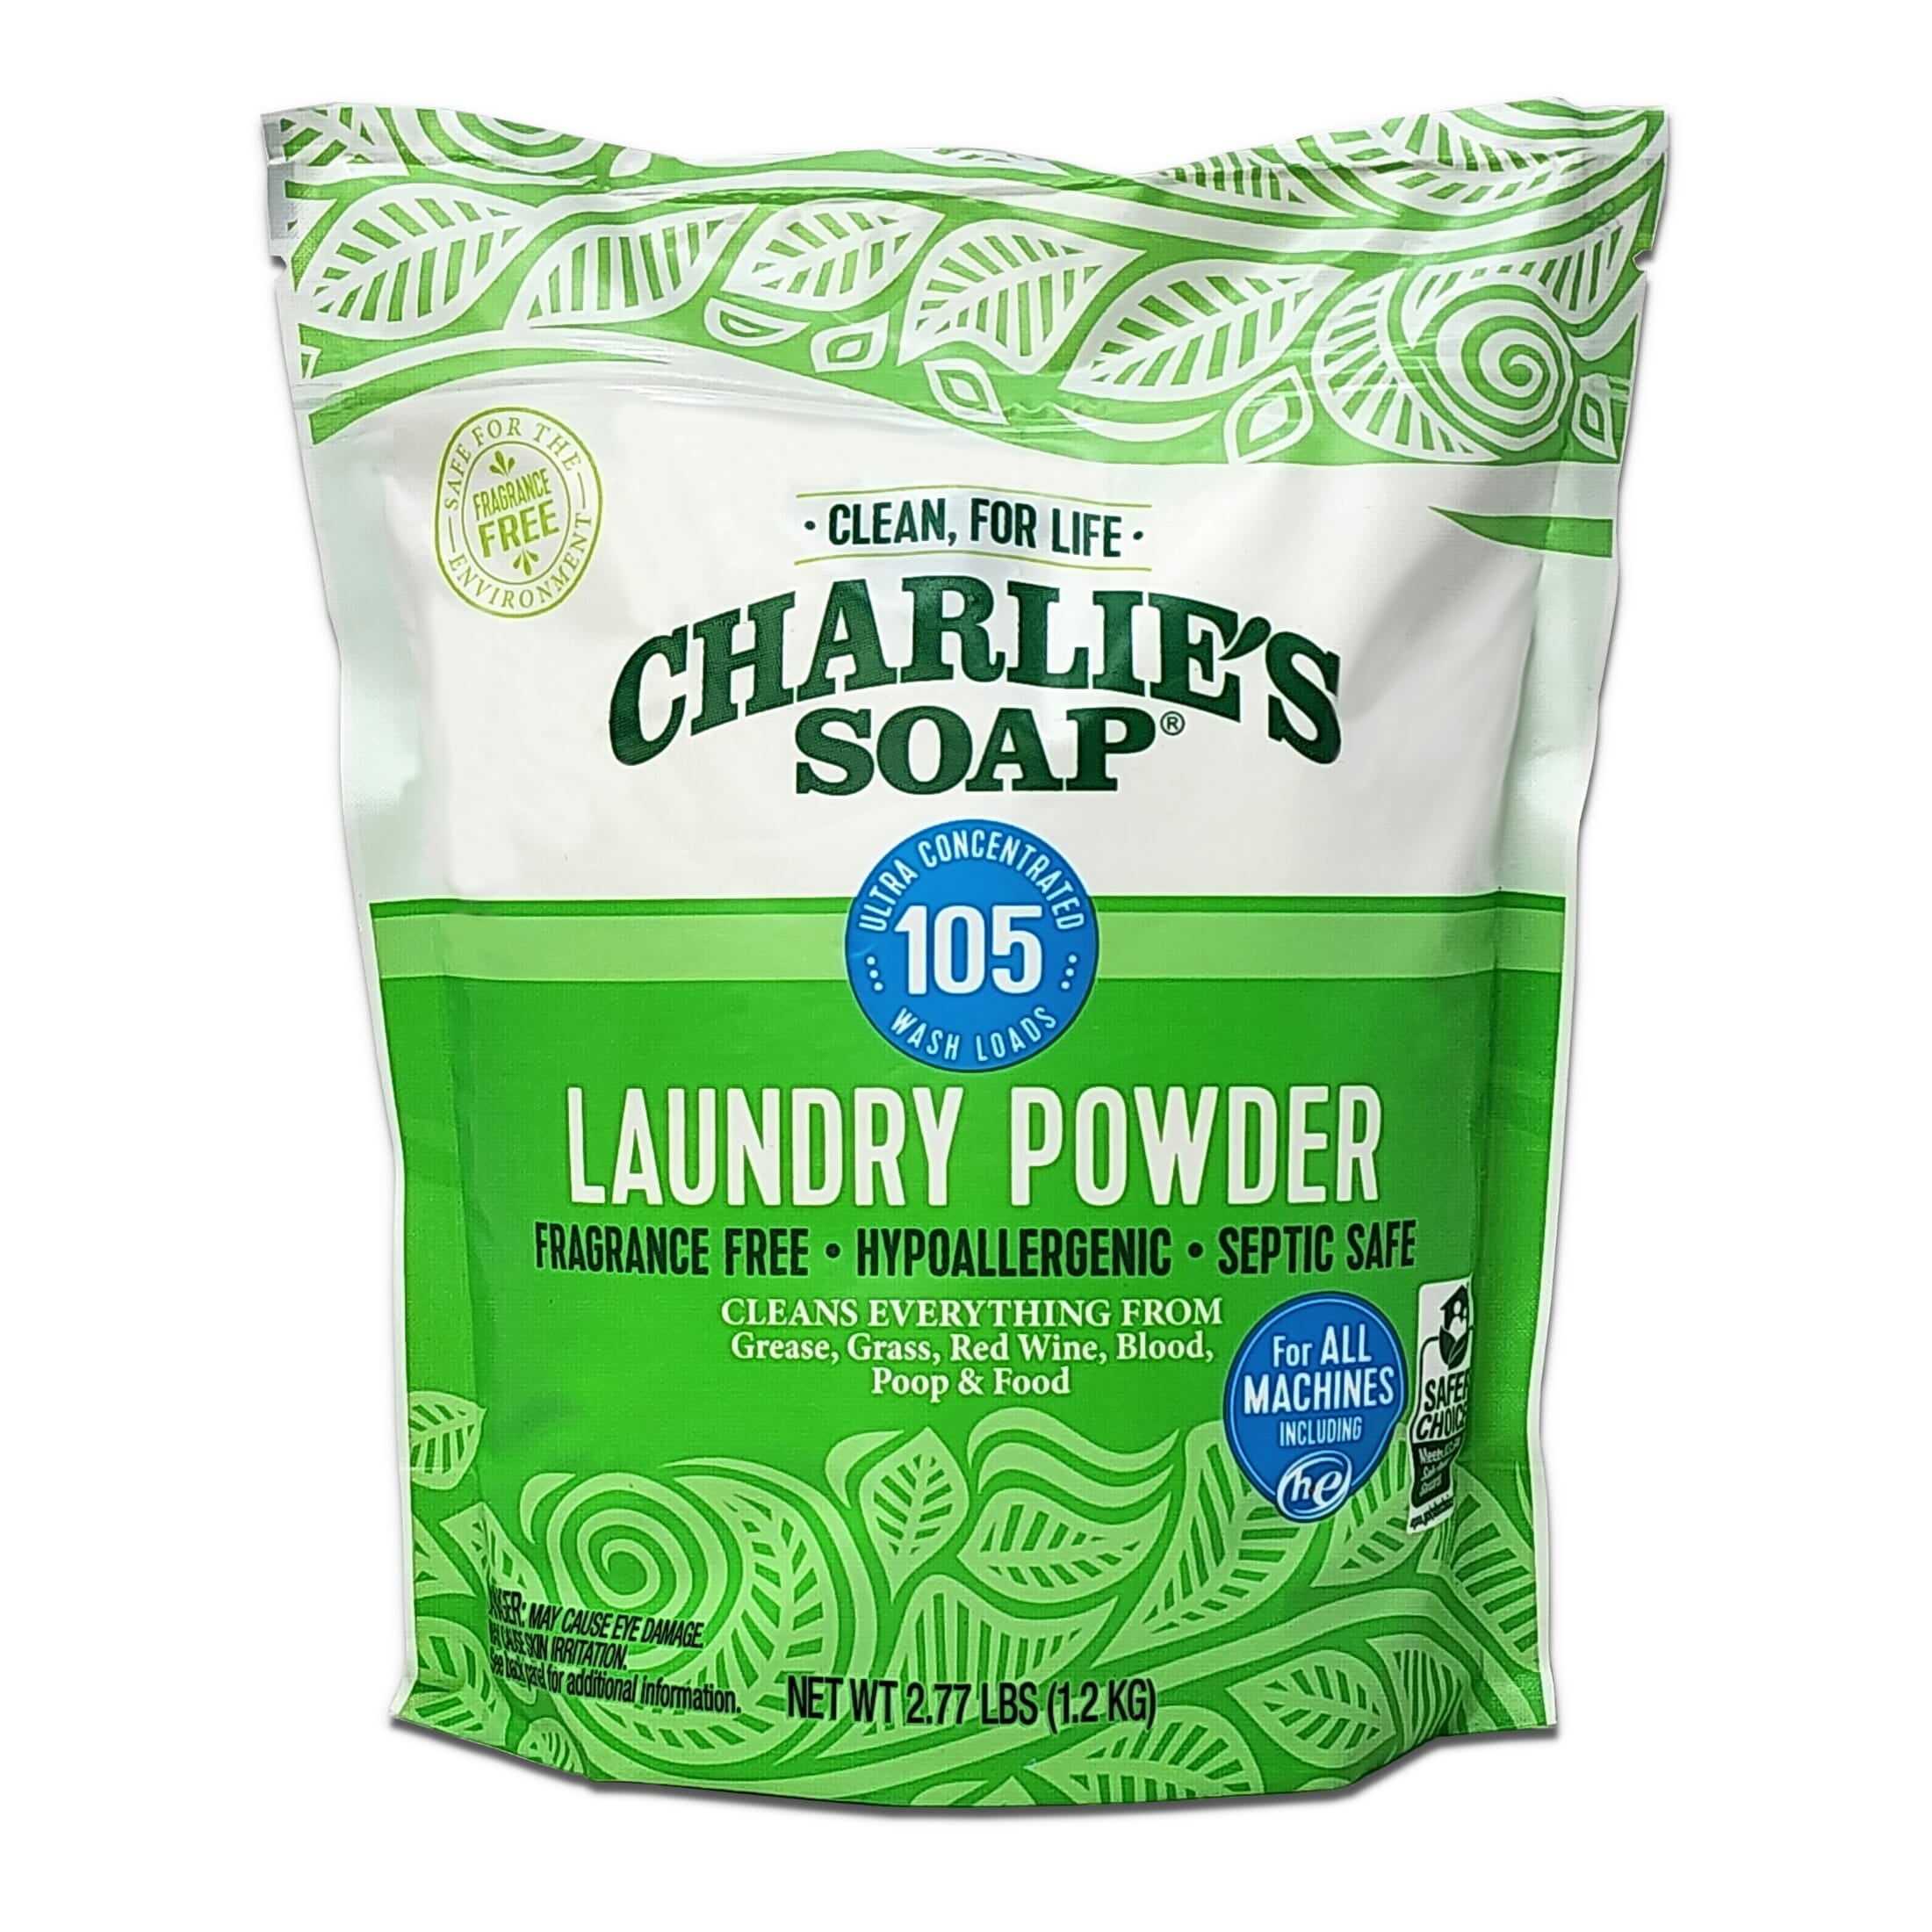 Molly's Suds Laundry Powder 120 Loads - Unscented 